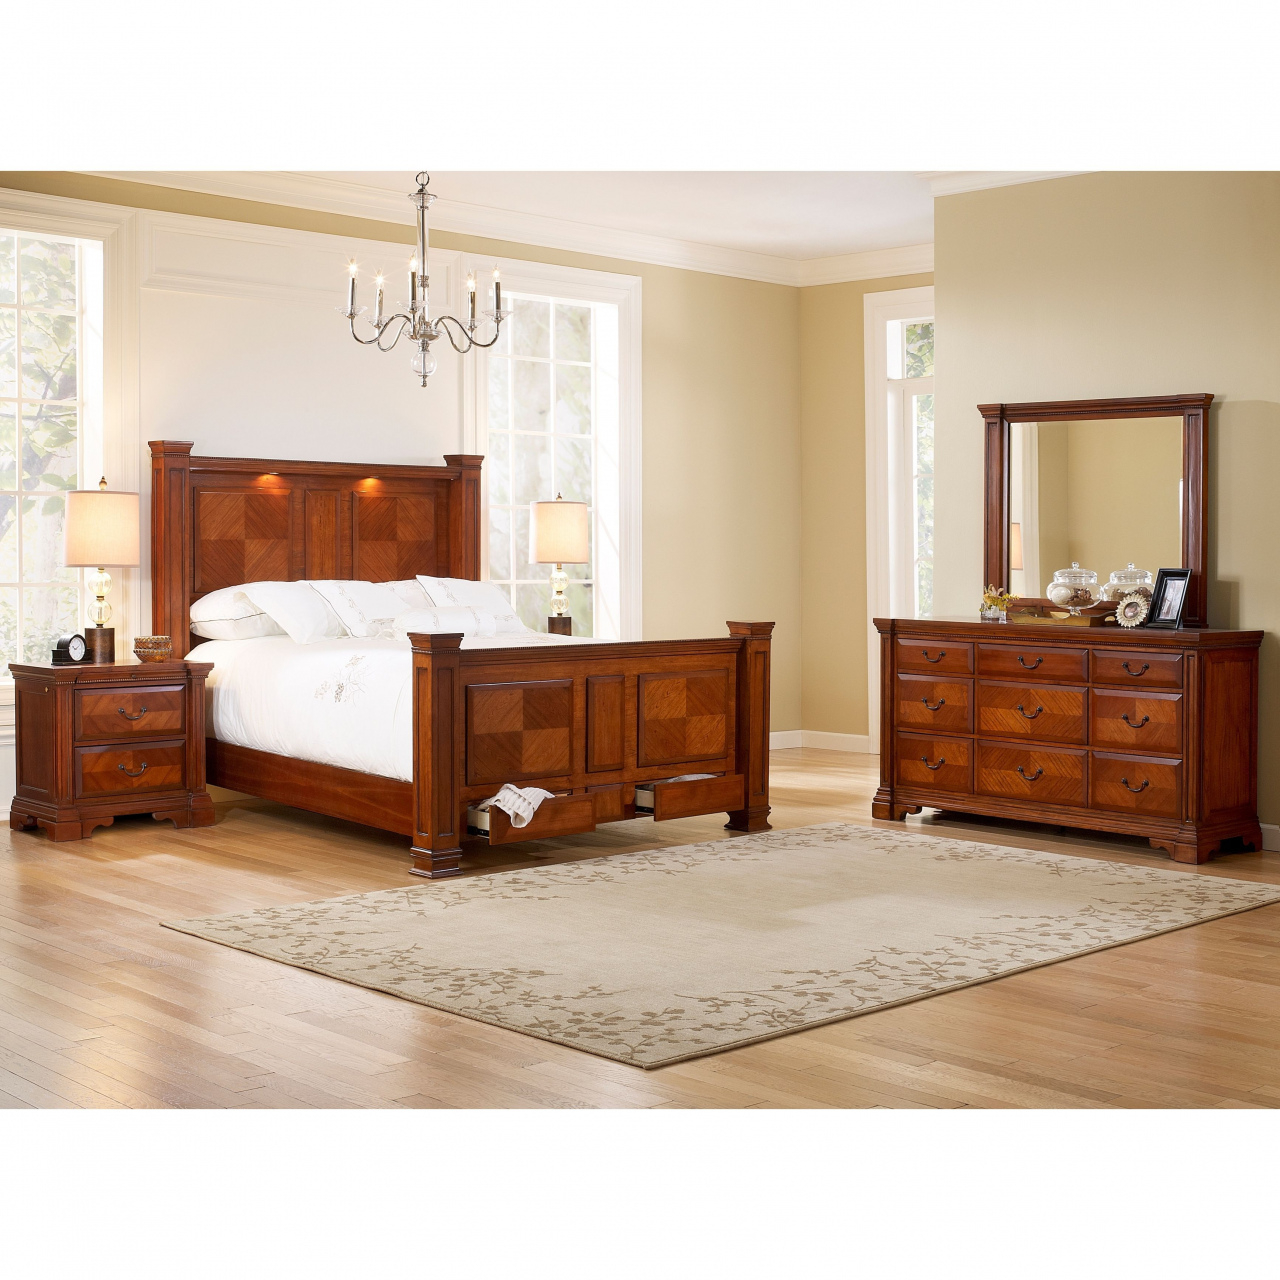 Cymax Queen Bedroom Sets The Smithfield Bedroom Set Features A pertaining to measurements 1280 X 1280